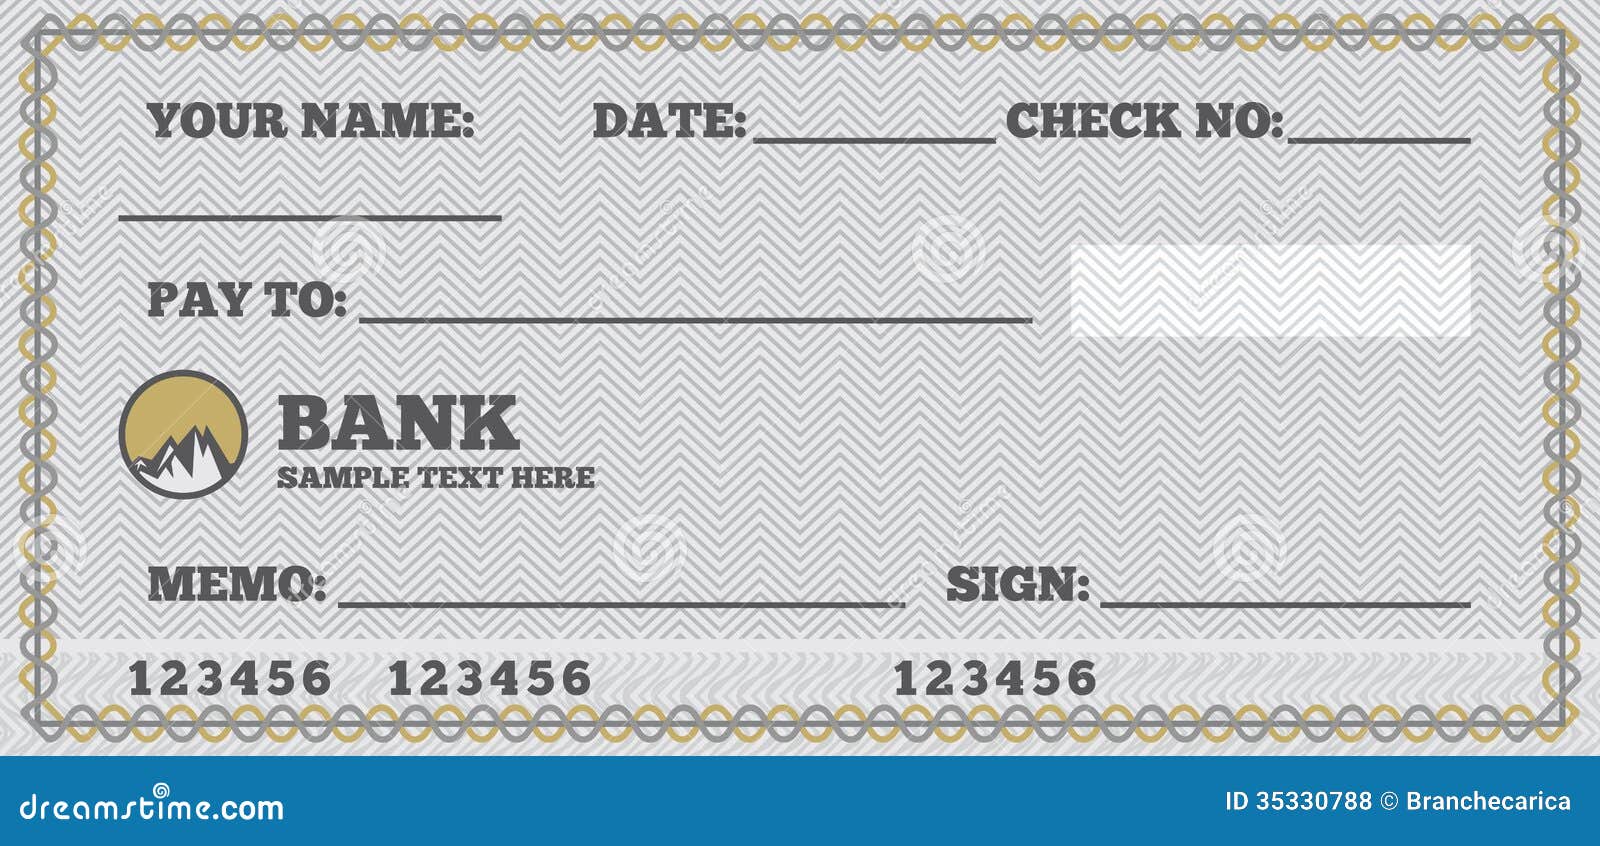 bank cheque clipart - photo #30